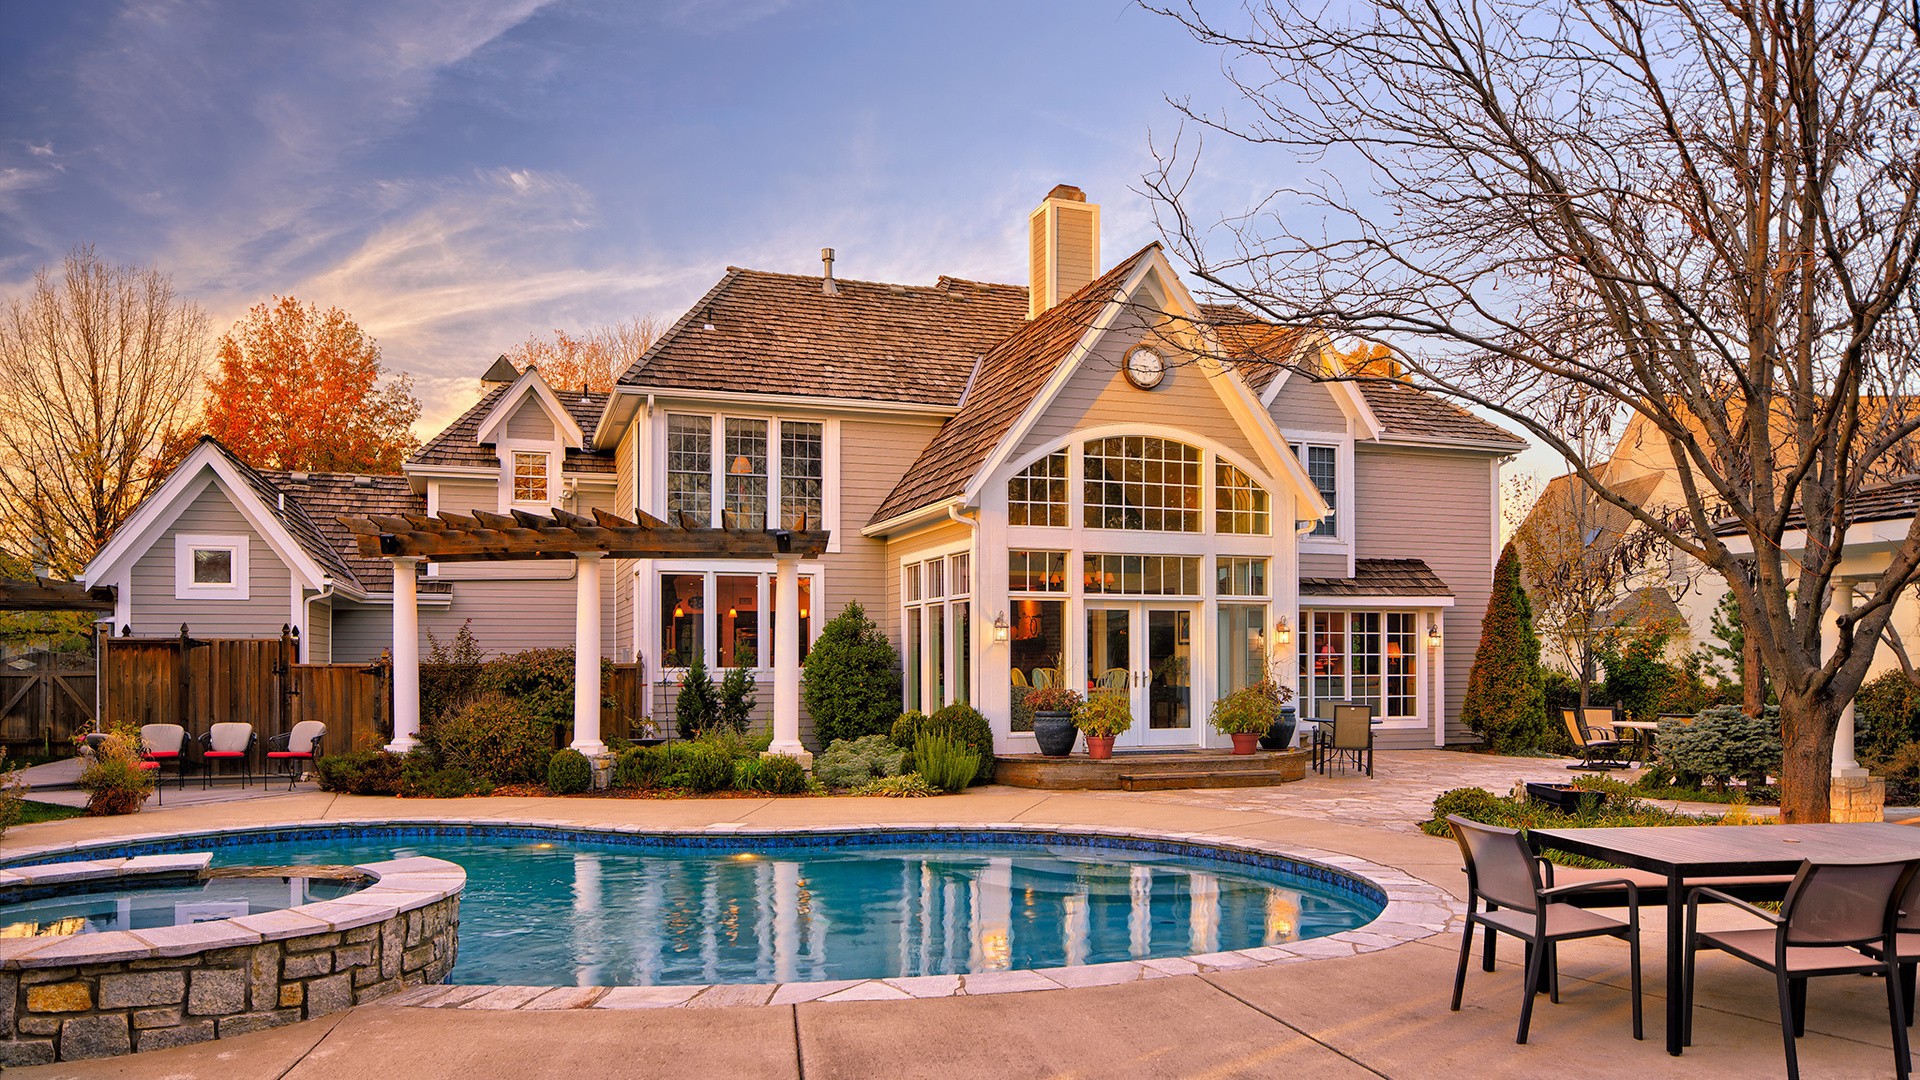 Pool At The House In A Residential Area Wallpaper And Image